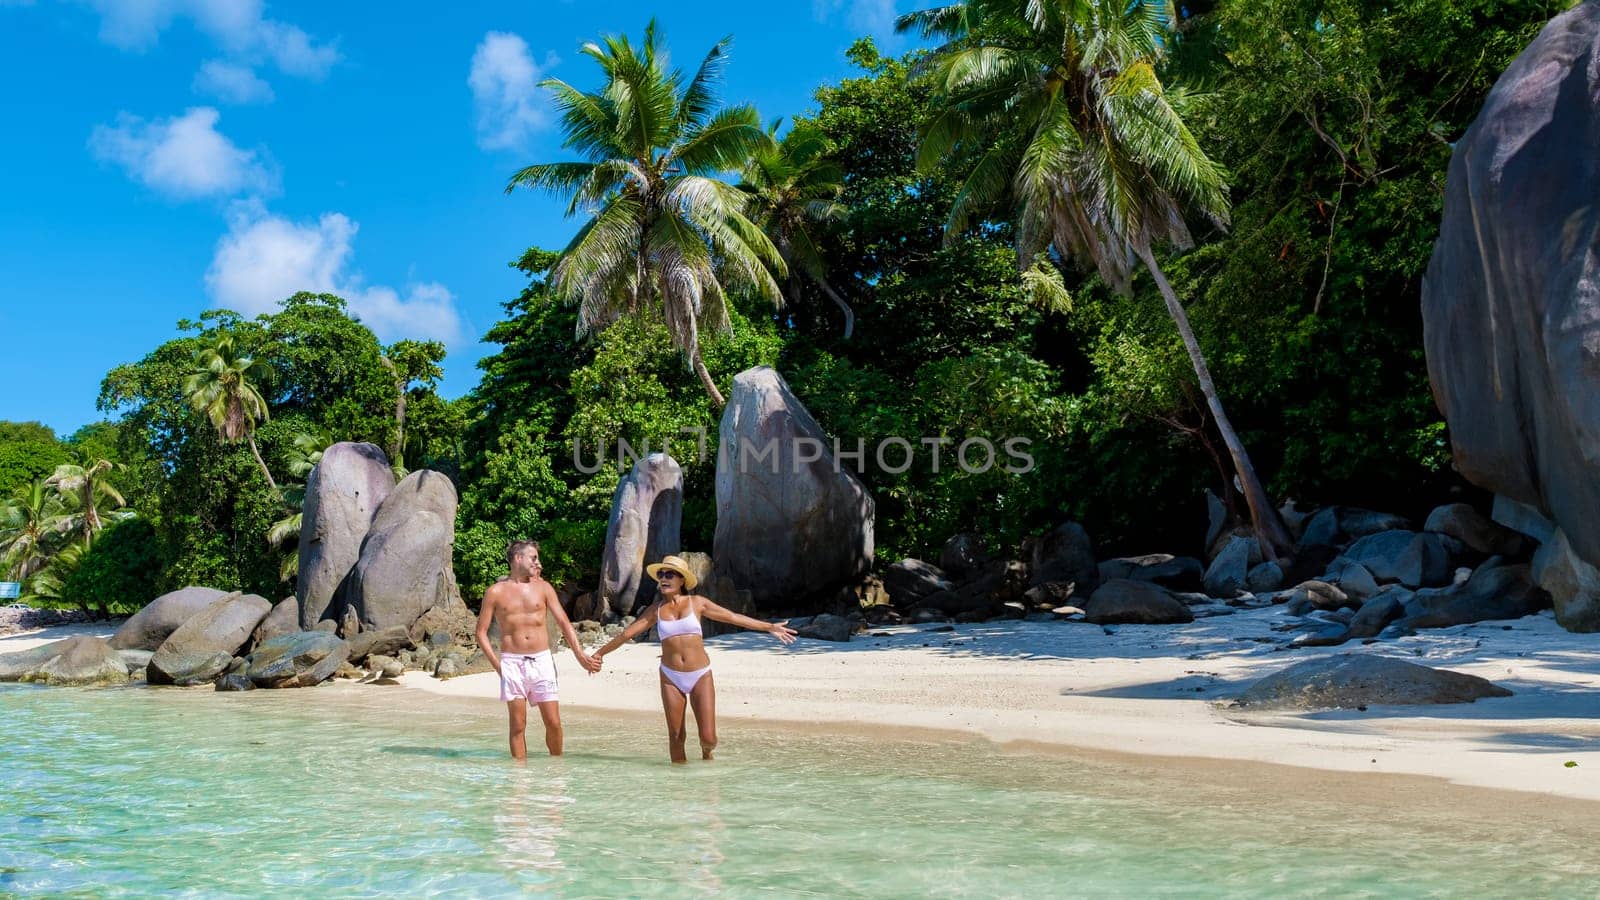 Mahe Seychelles tropical island with white sandy beaches and palm trees, a couple of men and women mid age on vacation at Seychelles visiting a tropical beach